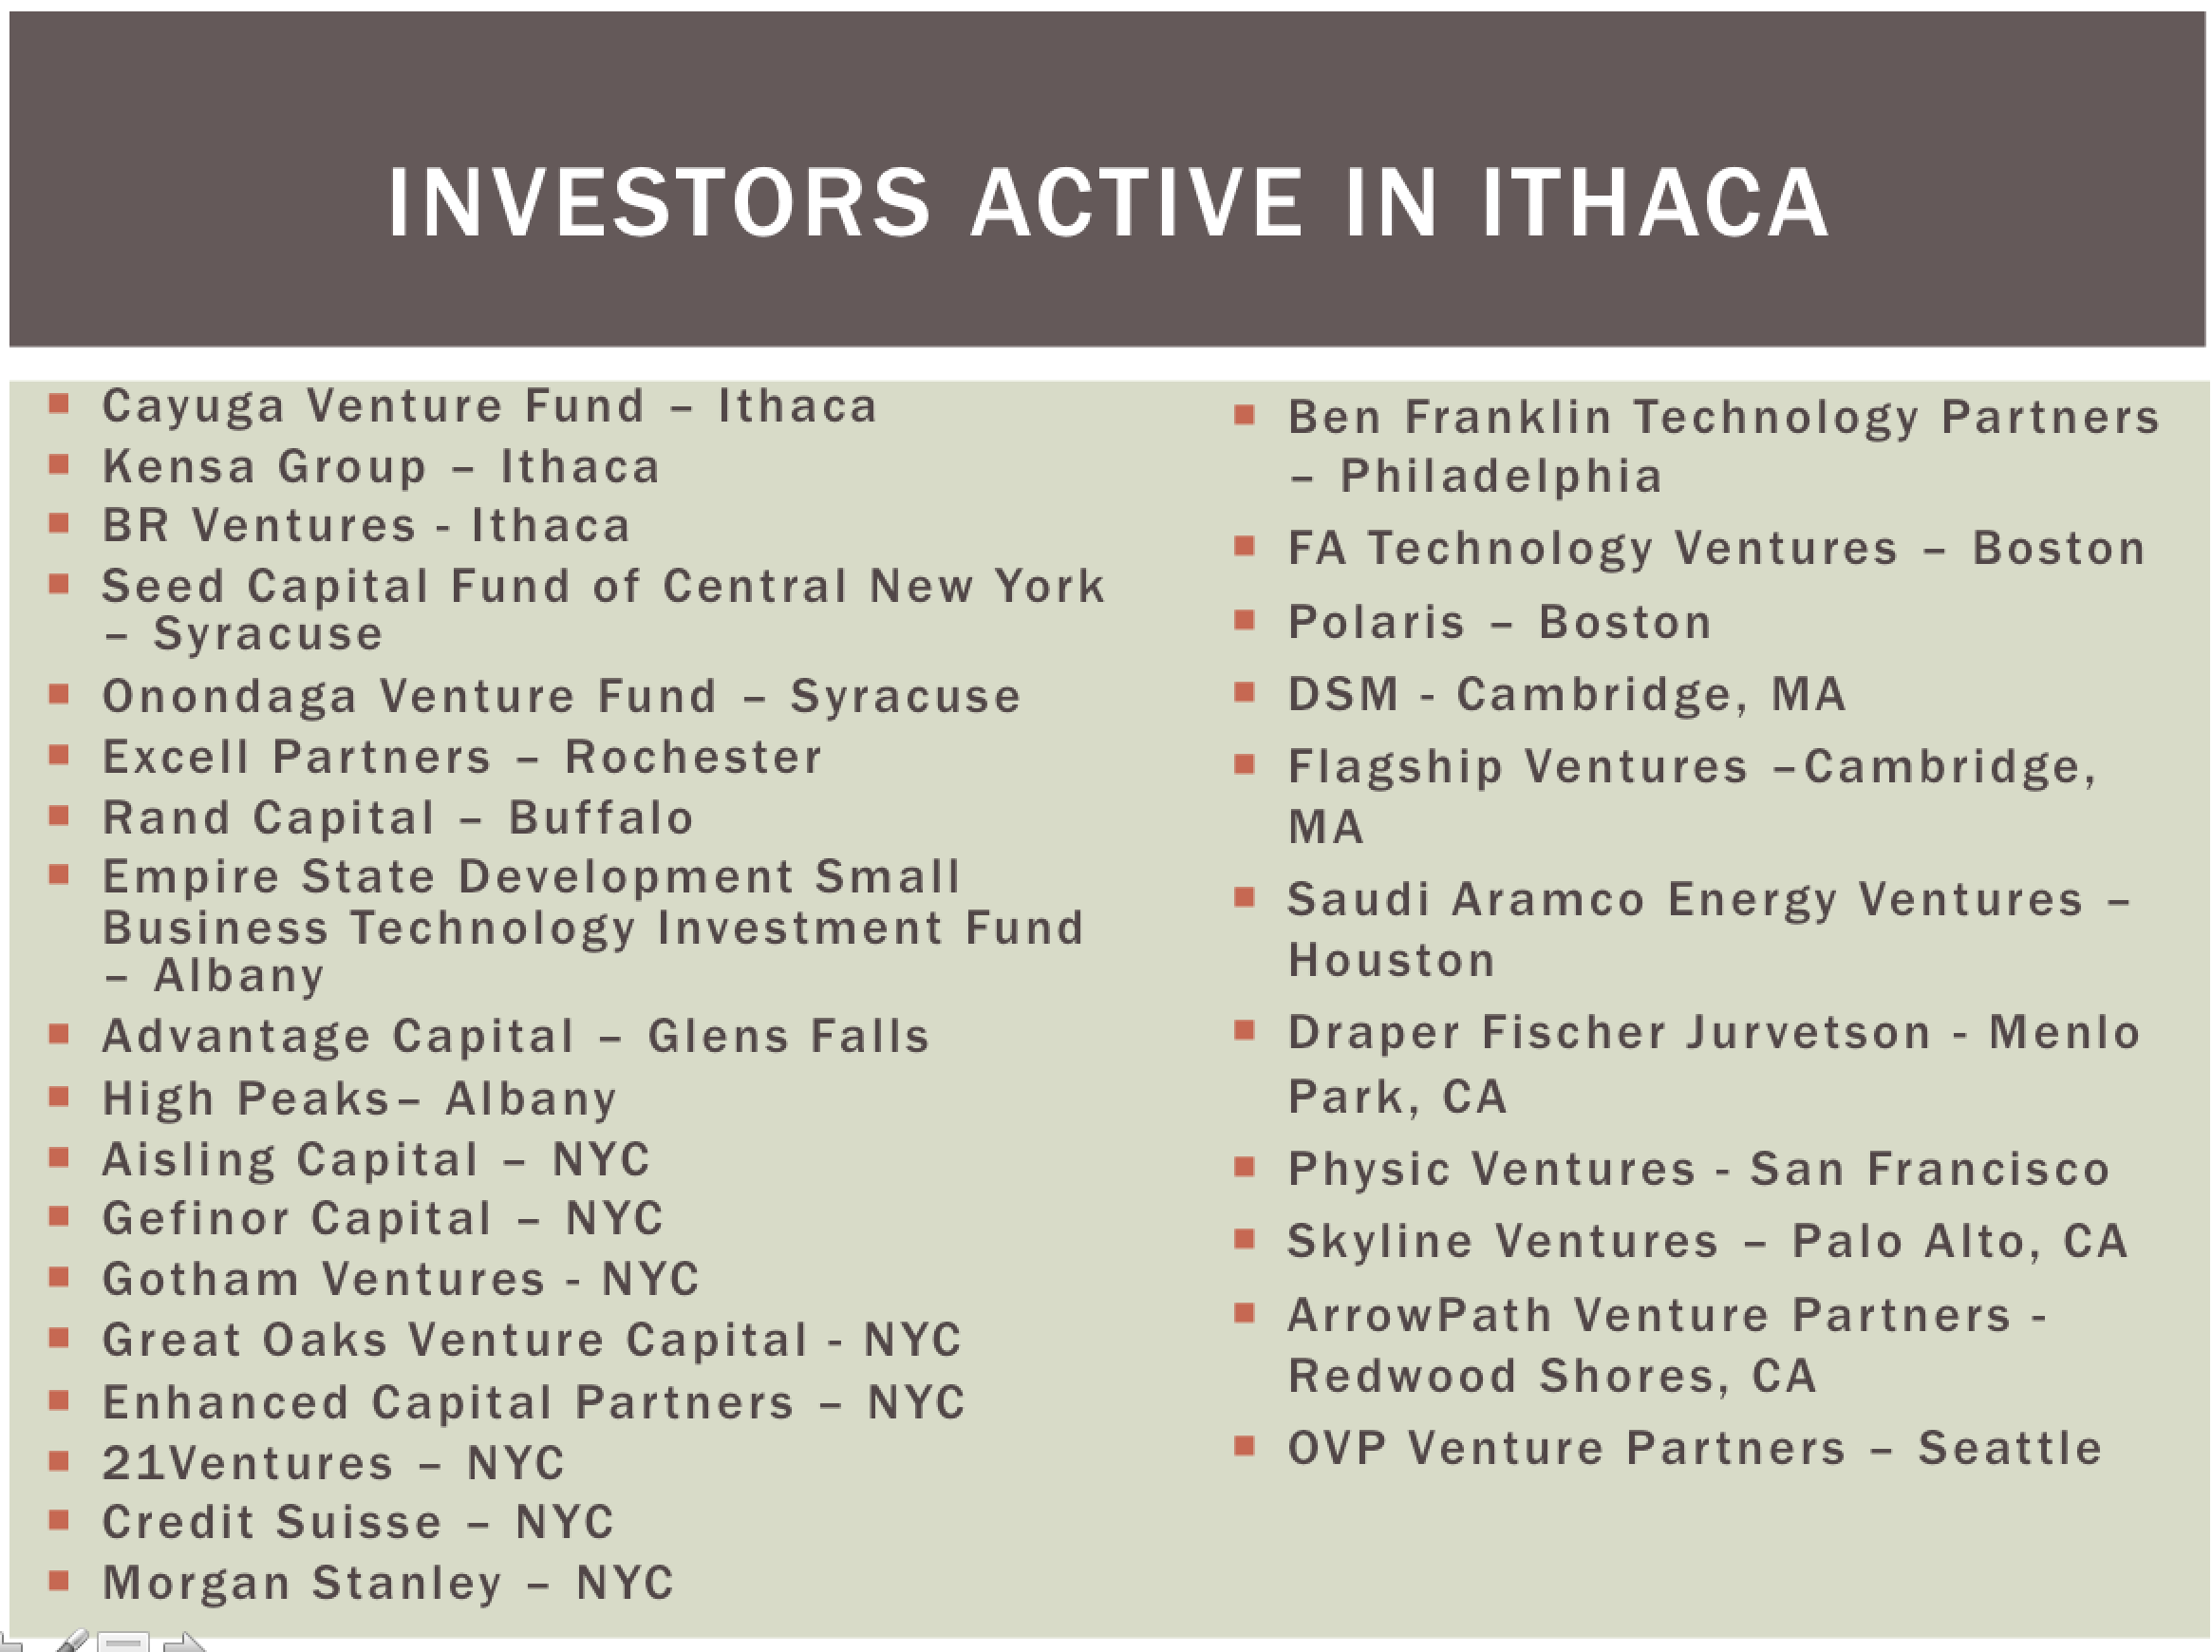 Venture Capital Investors Active in Southern Tier region of upstate New York as of October 2014